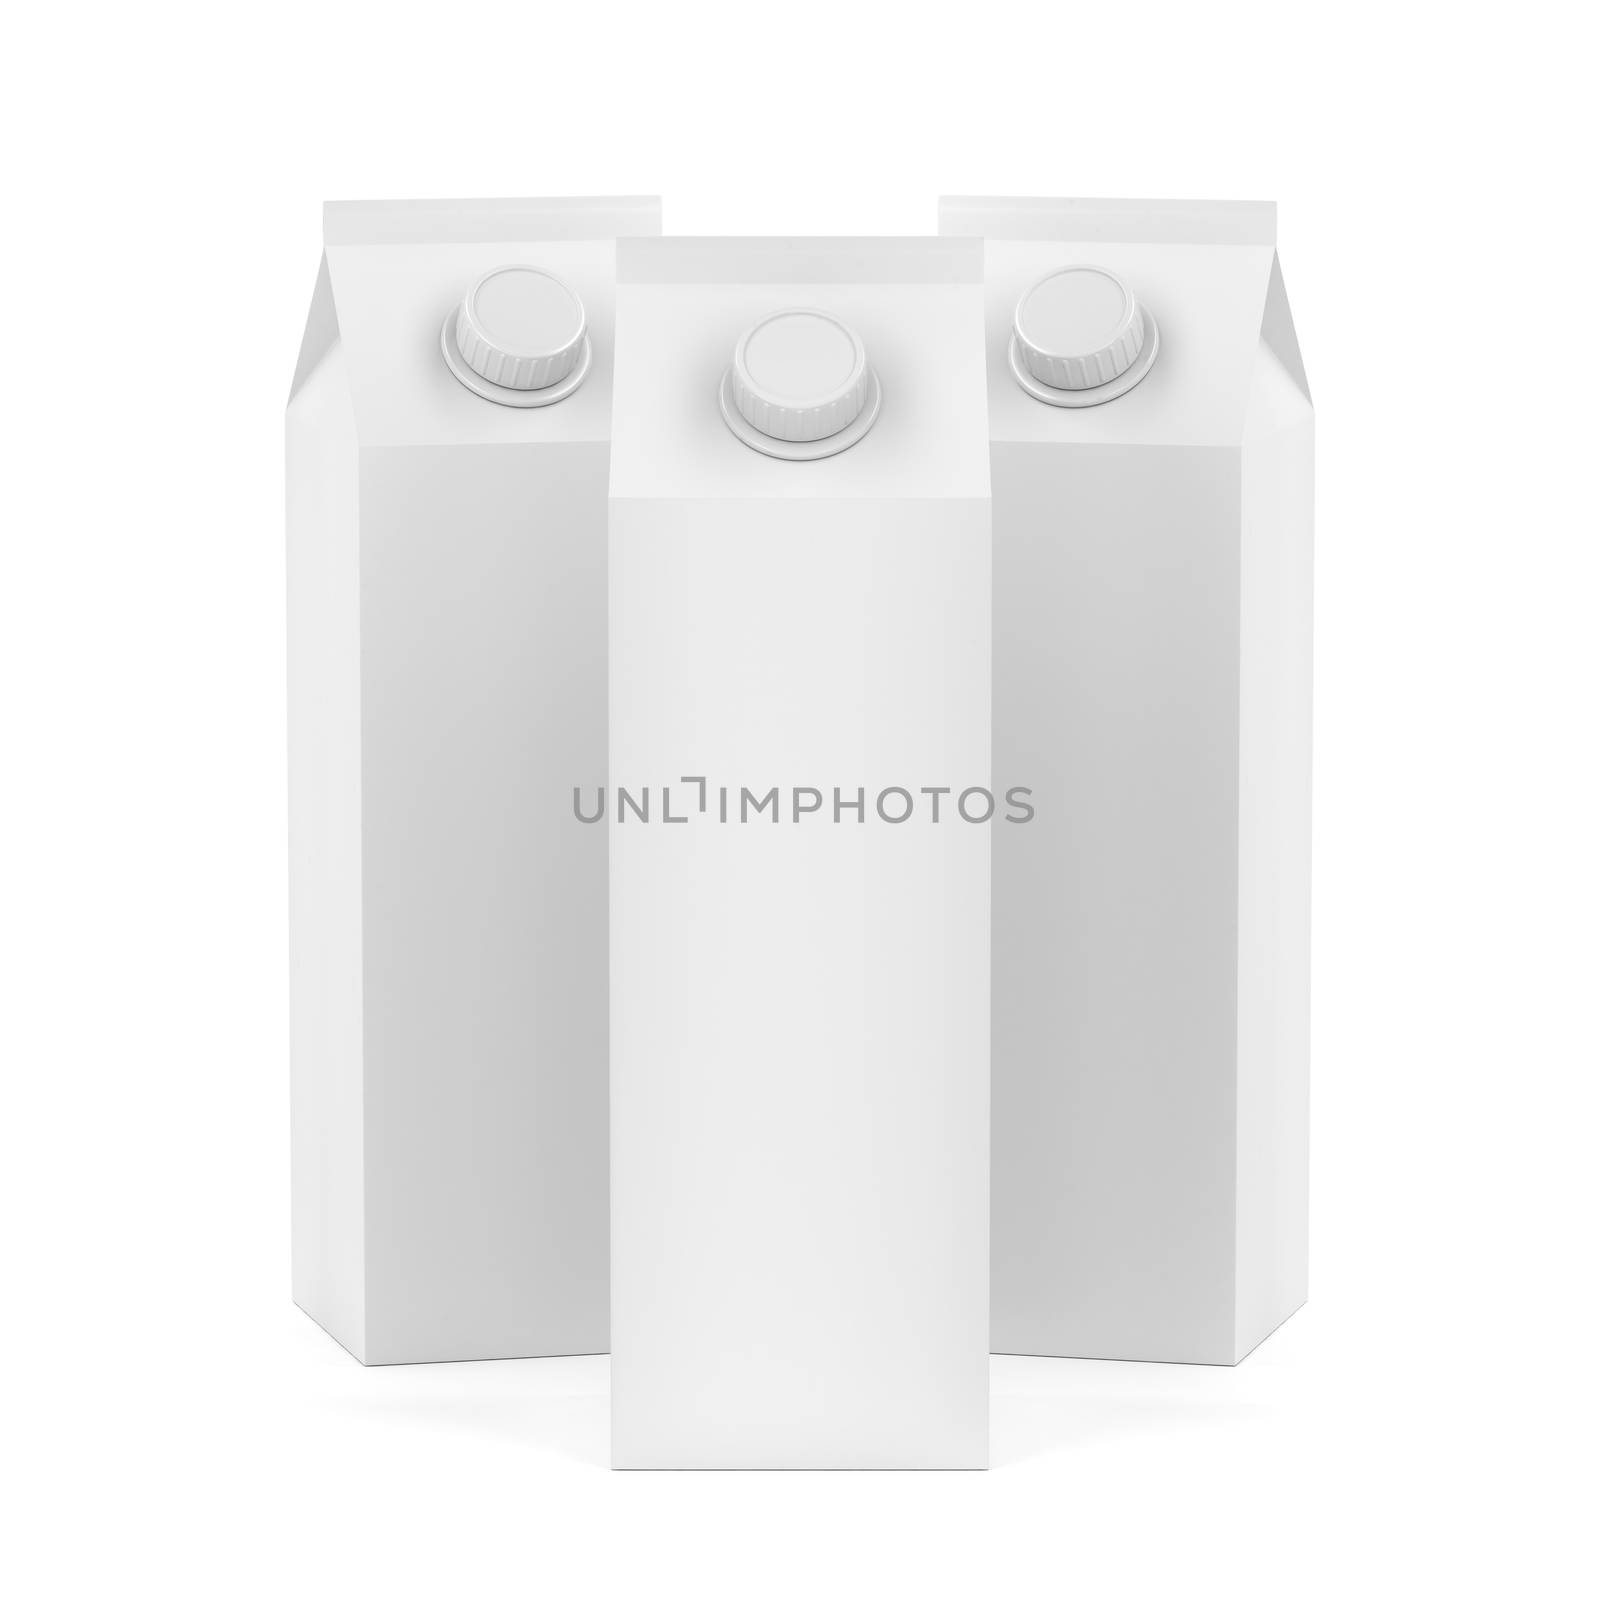 Group of white blank containers for juice or milk